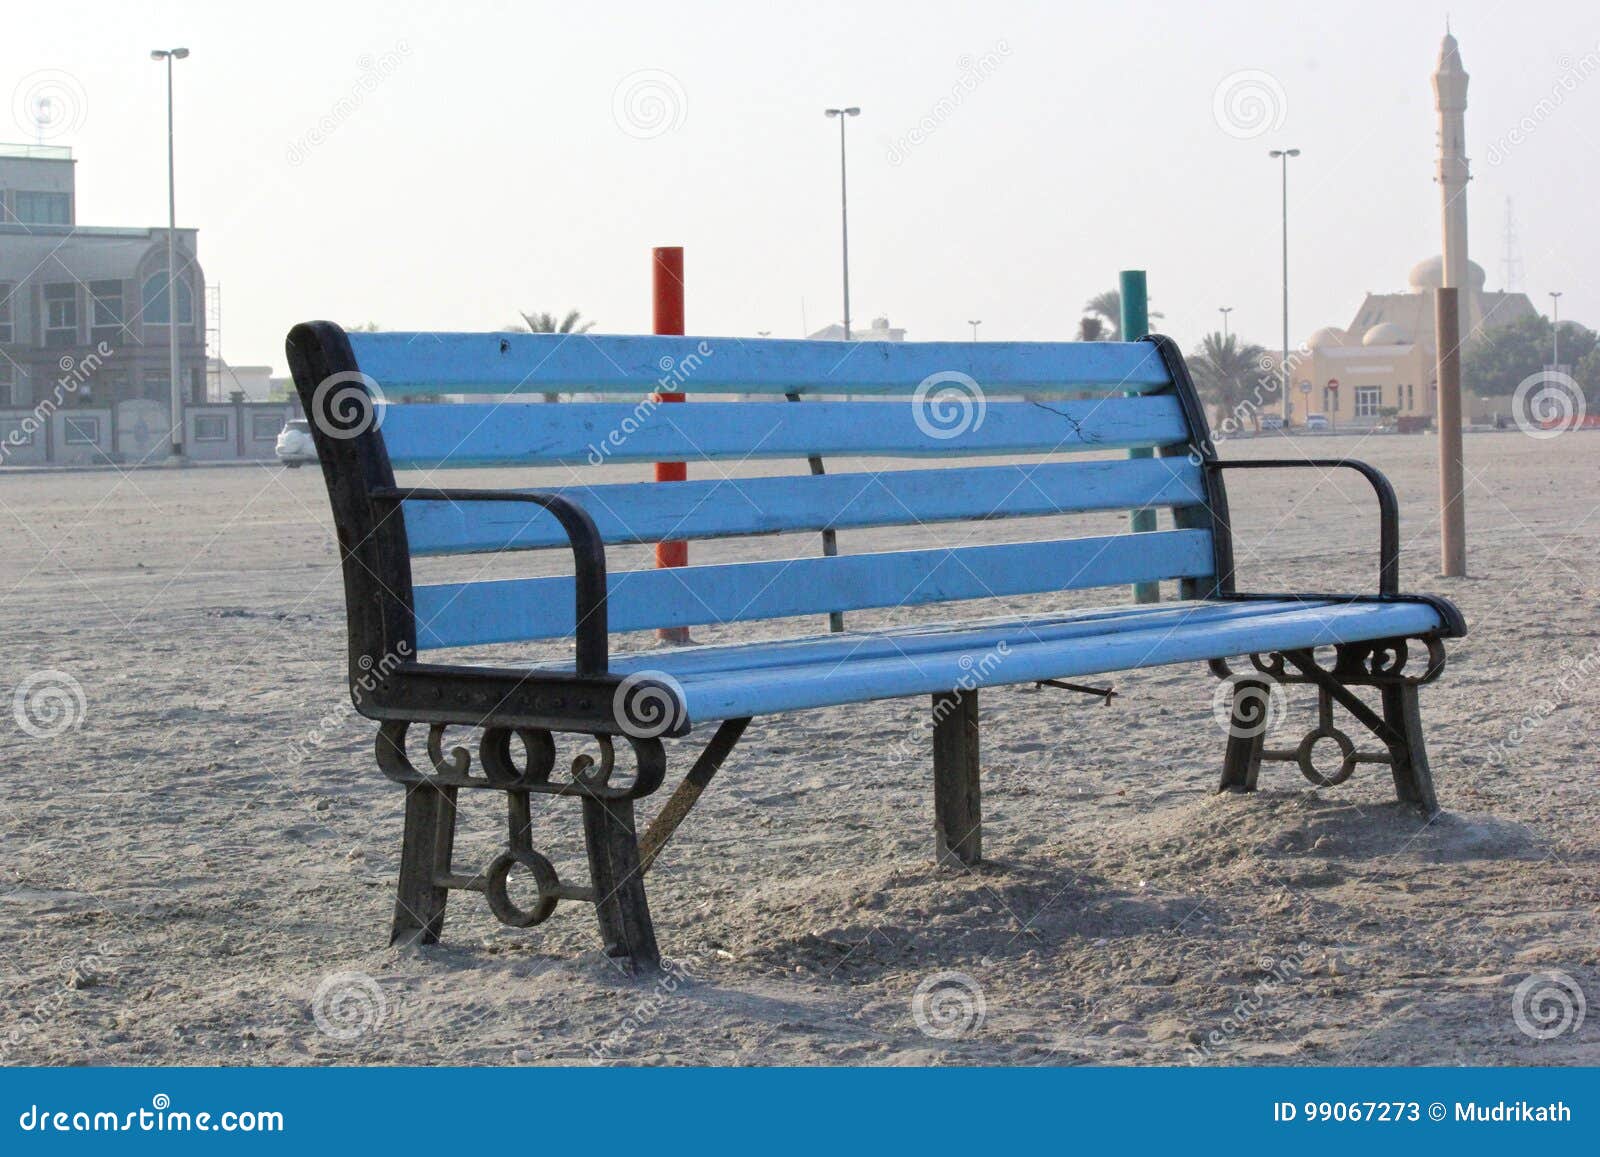 Peaceful Bench Seat In Beach Side View Dubai Stock Image Image